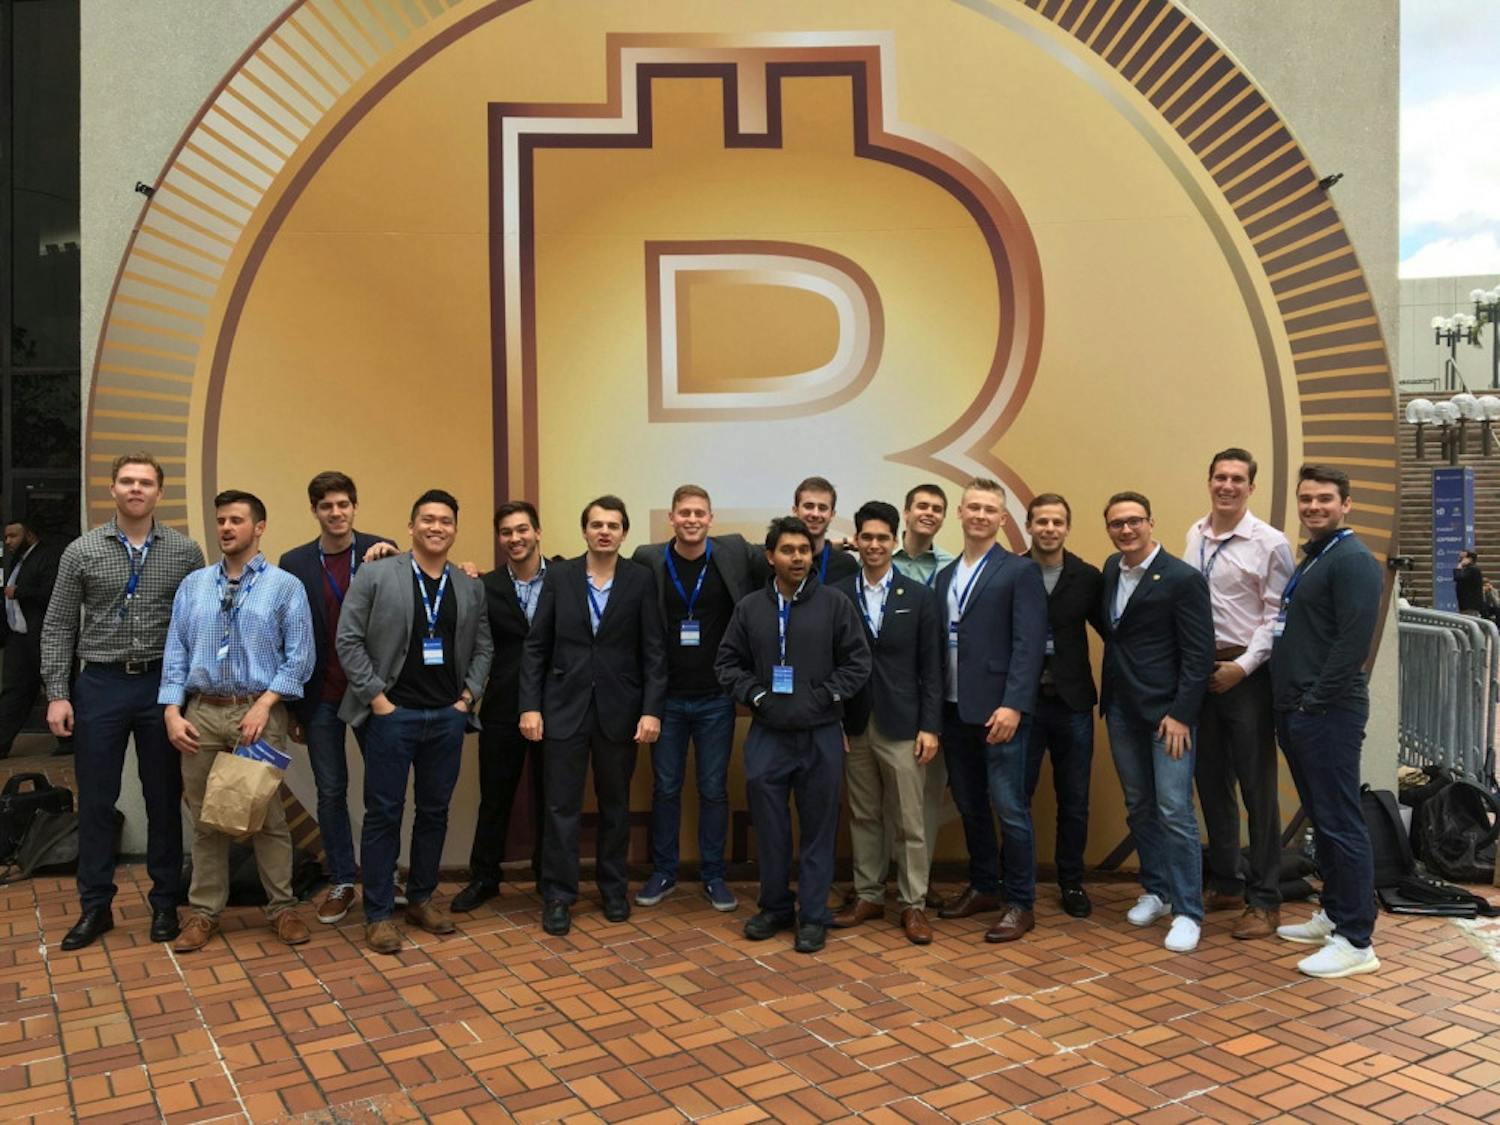 UF’s Bitcoin club attended The North American Bitcoin Conference on Thursday and Friday in South Florida. Some of the memebers later participated in a hackathon, where they won fourth place and .05 bitcoin or about $532.64.